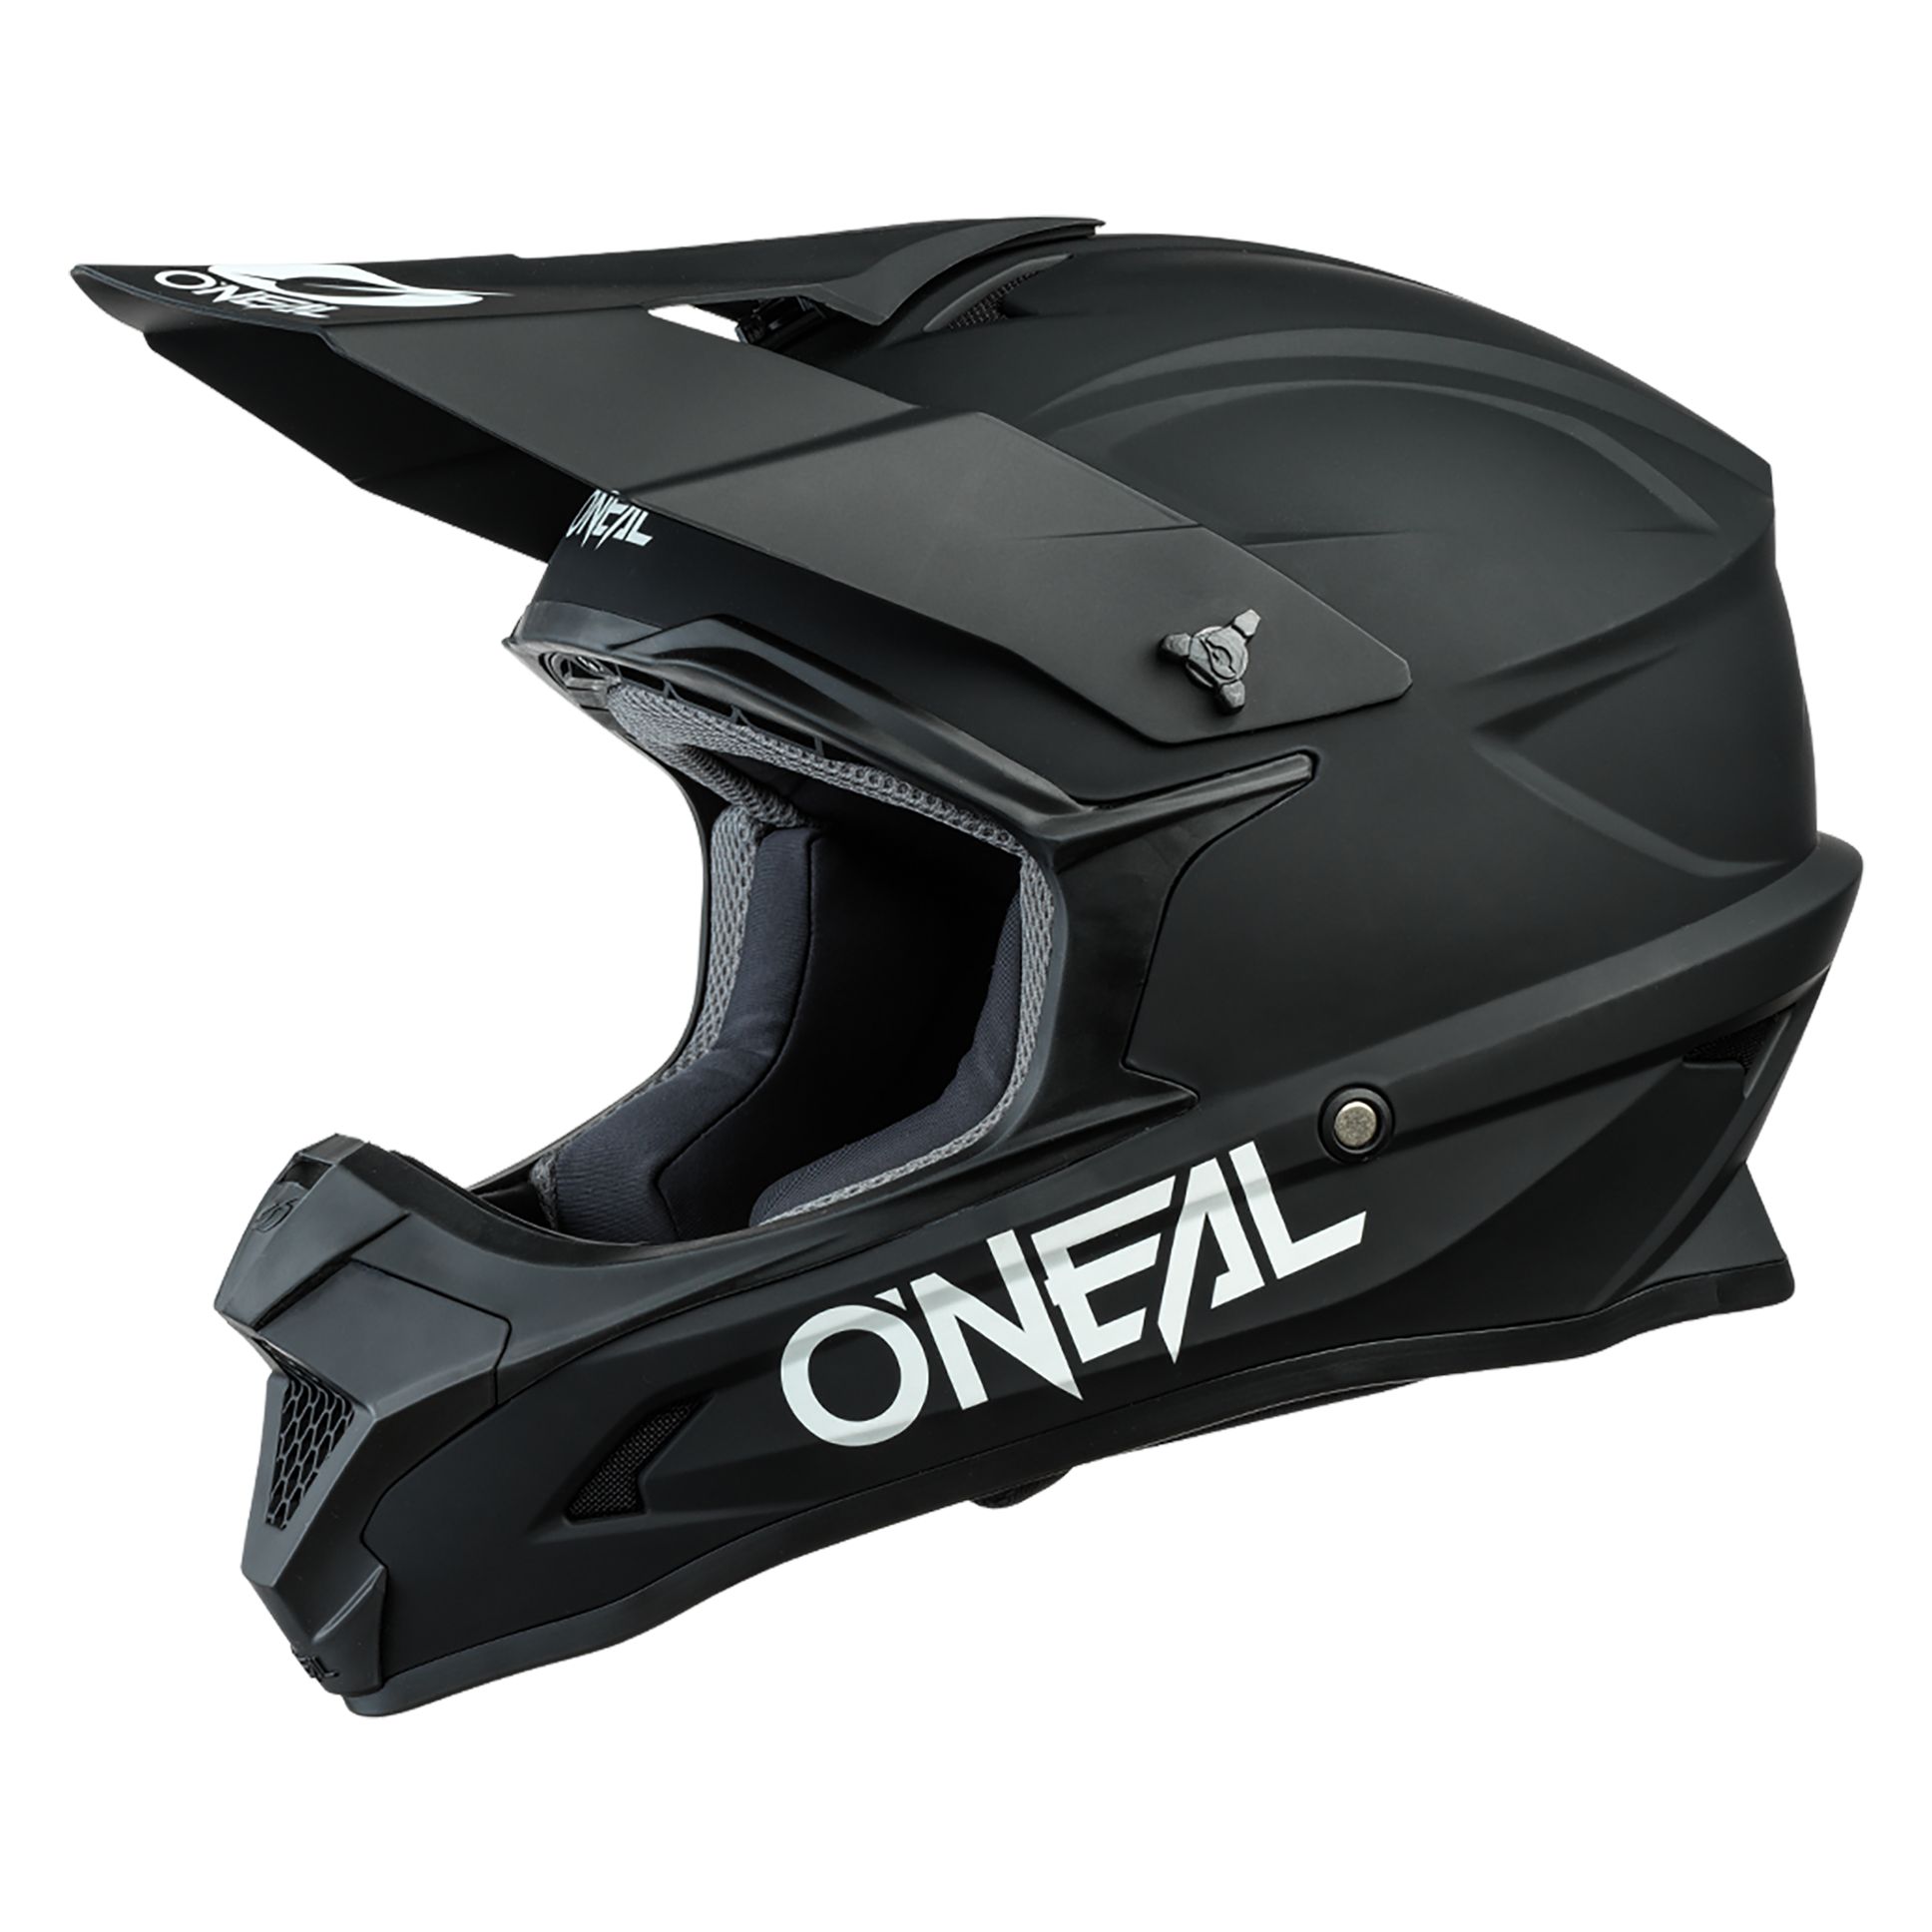 Image of Casque cross O'Neal 1 SRS - YOUTH SOLID - BLACK MATT